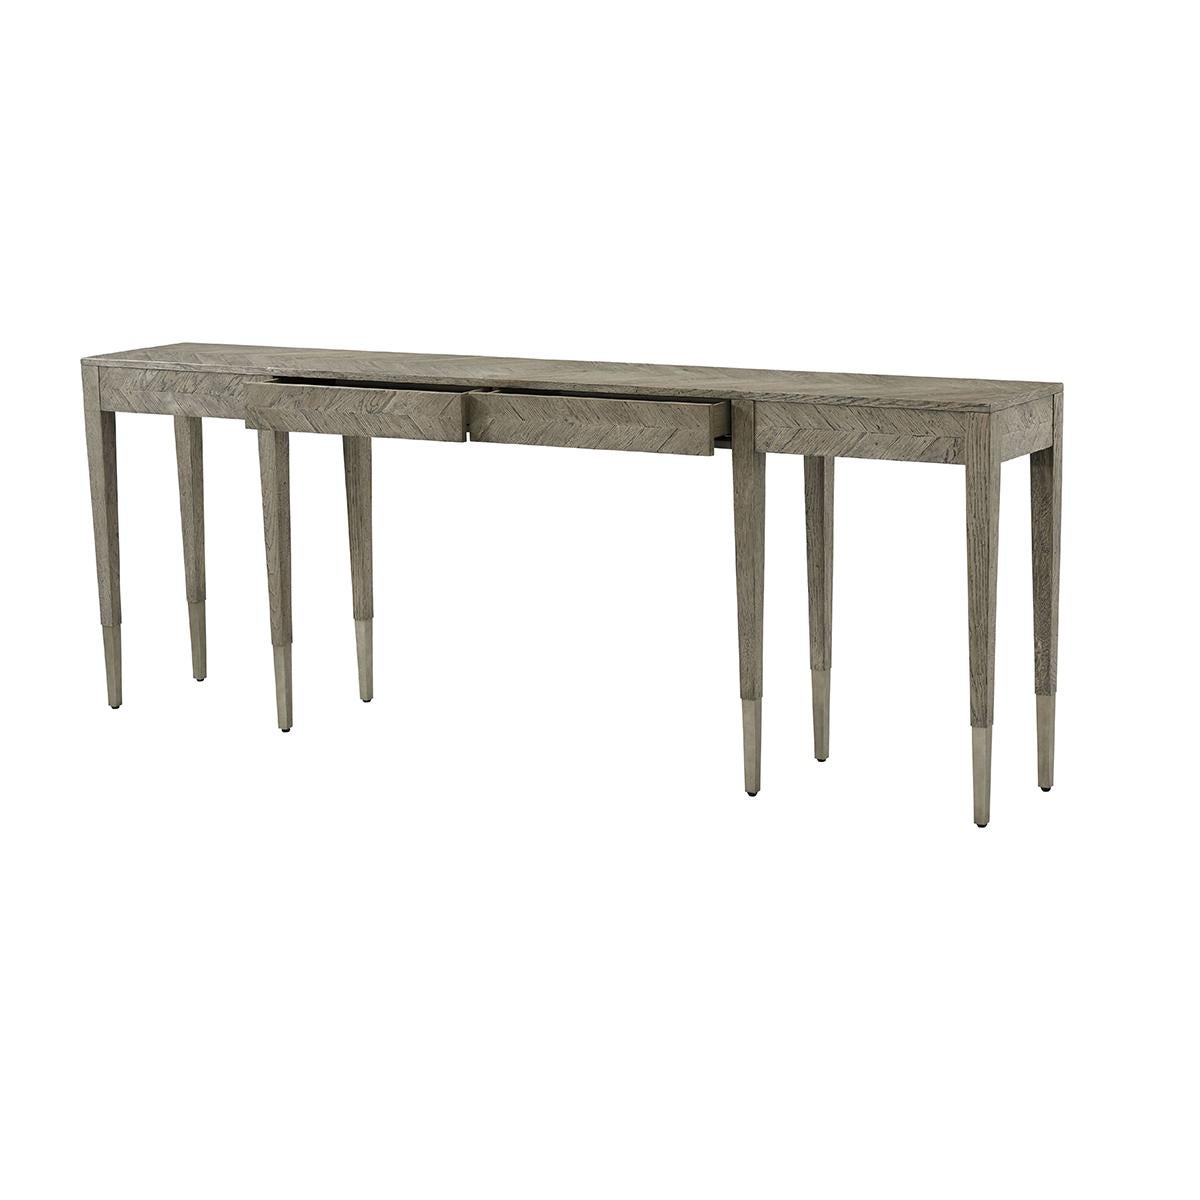 console table dimensions in feet